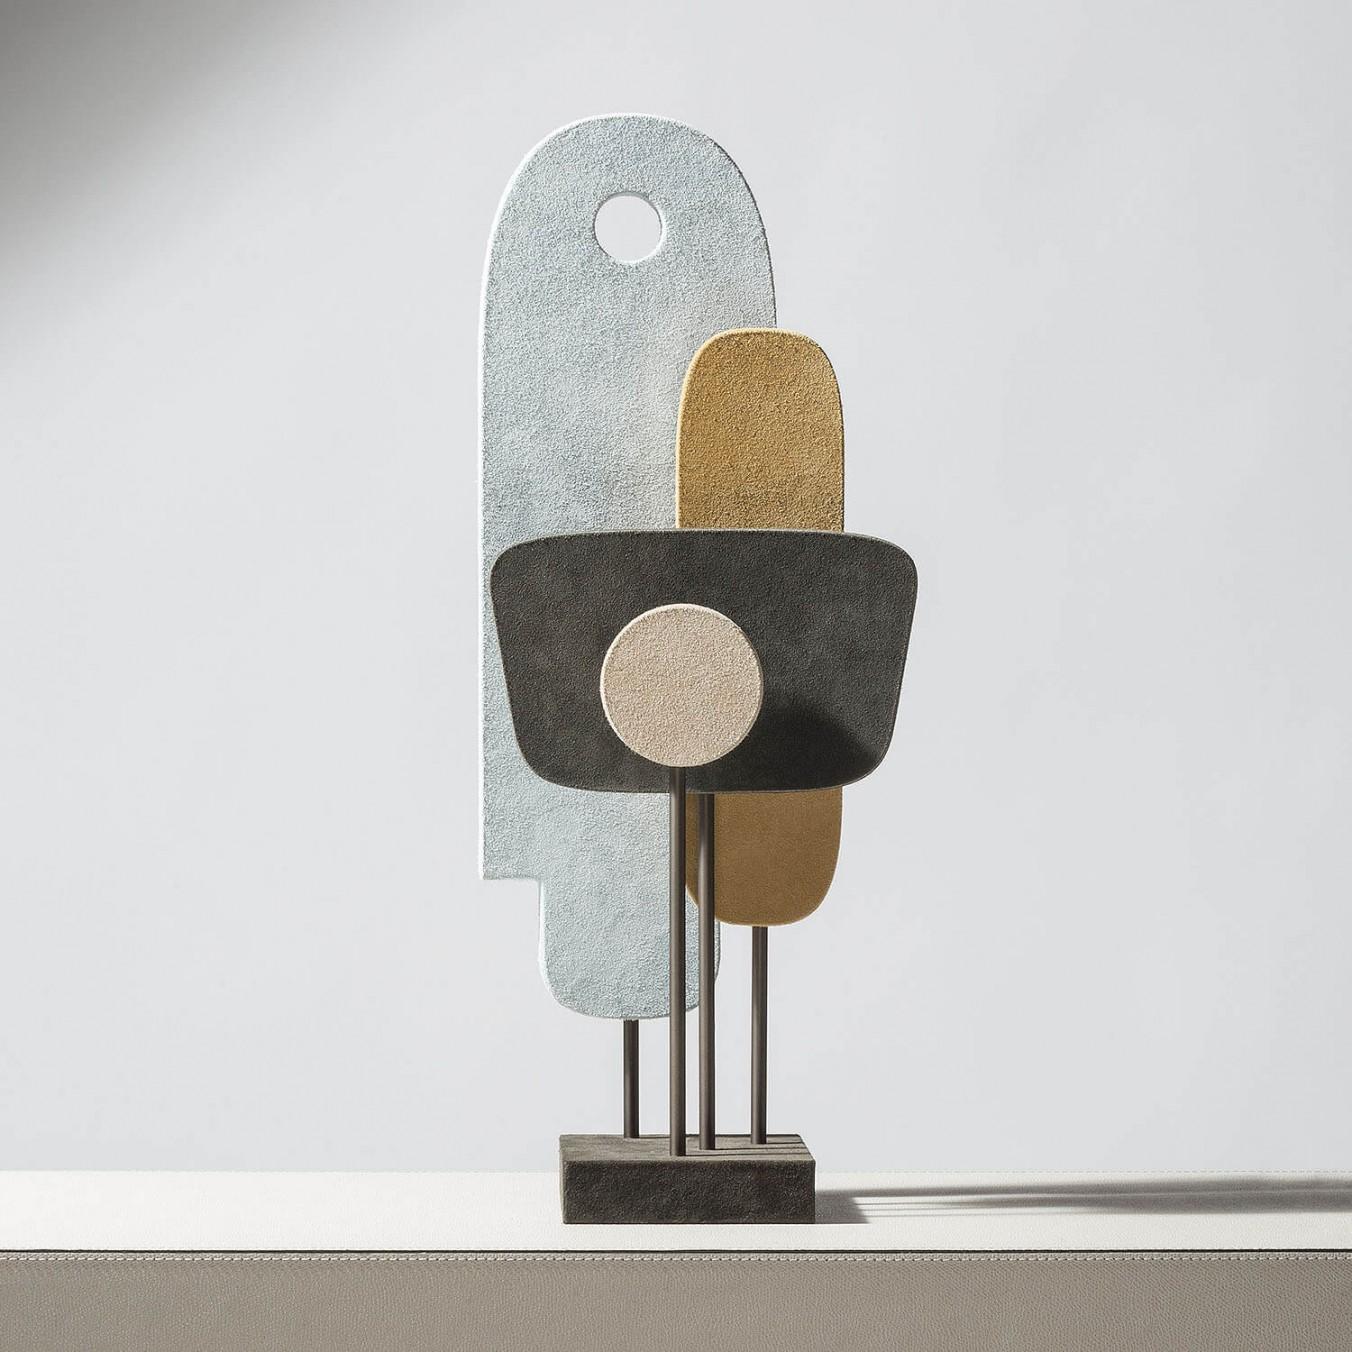 Contemporary leather sculpture - tabou 1 by Stephane Parmentier for Giobagnara.

A mix of space-age design and tribal art, these contemporary totems are great decorative pieces able to create a connection between abstraction and